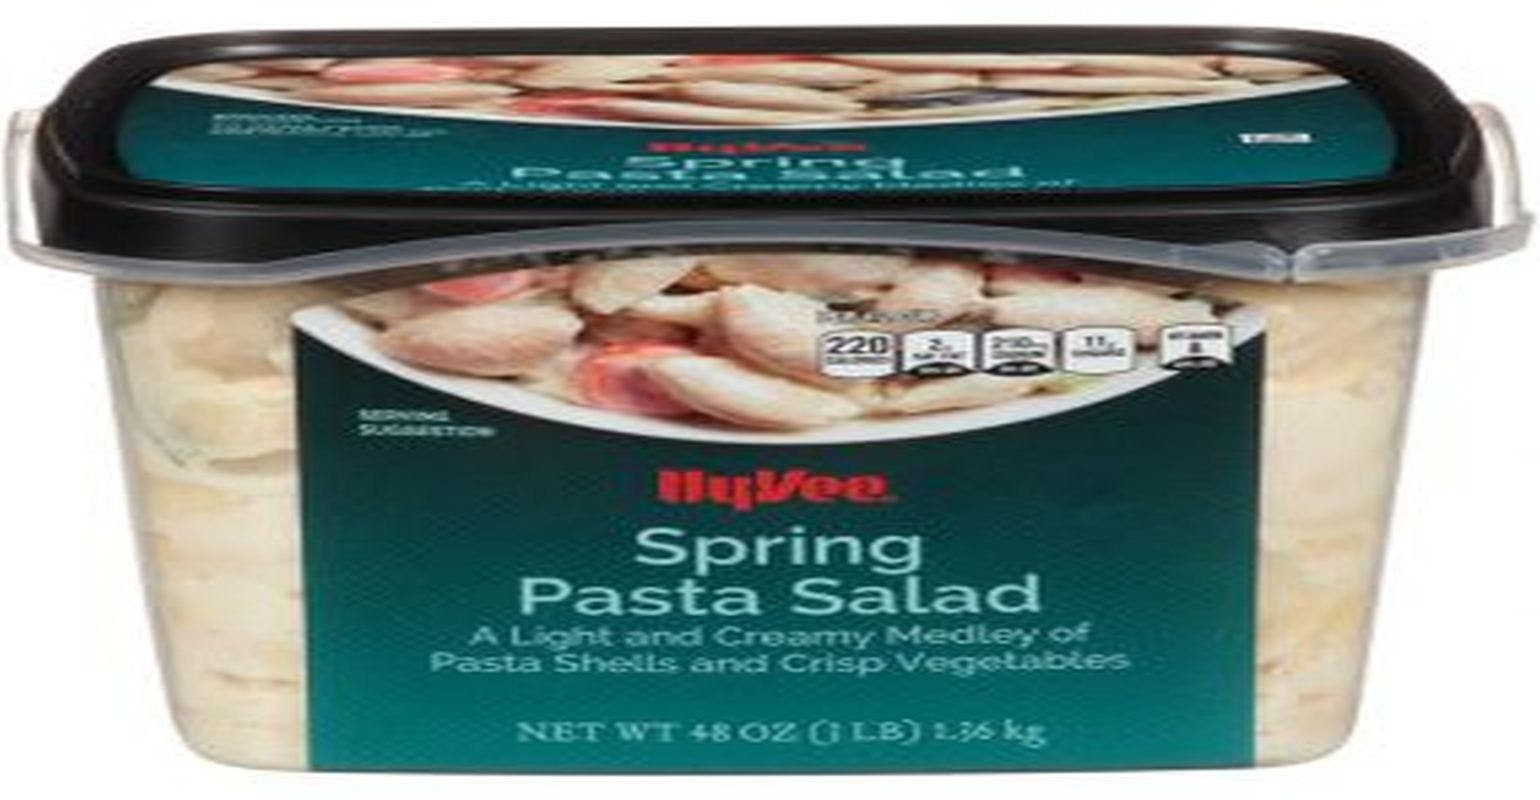 Outbreak of Salmonella Infections Linked to Hy-Vee Spring Pasta Salad